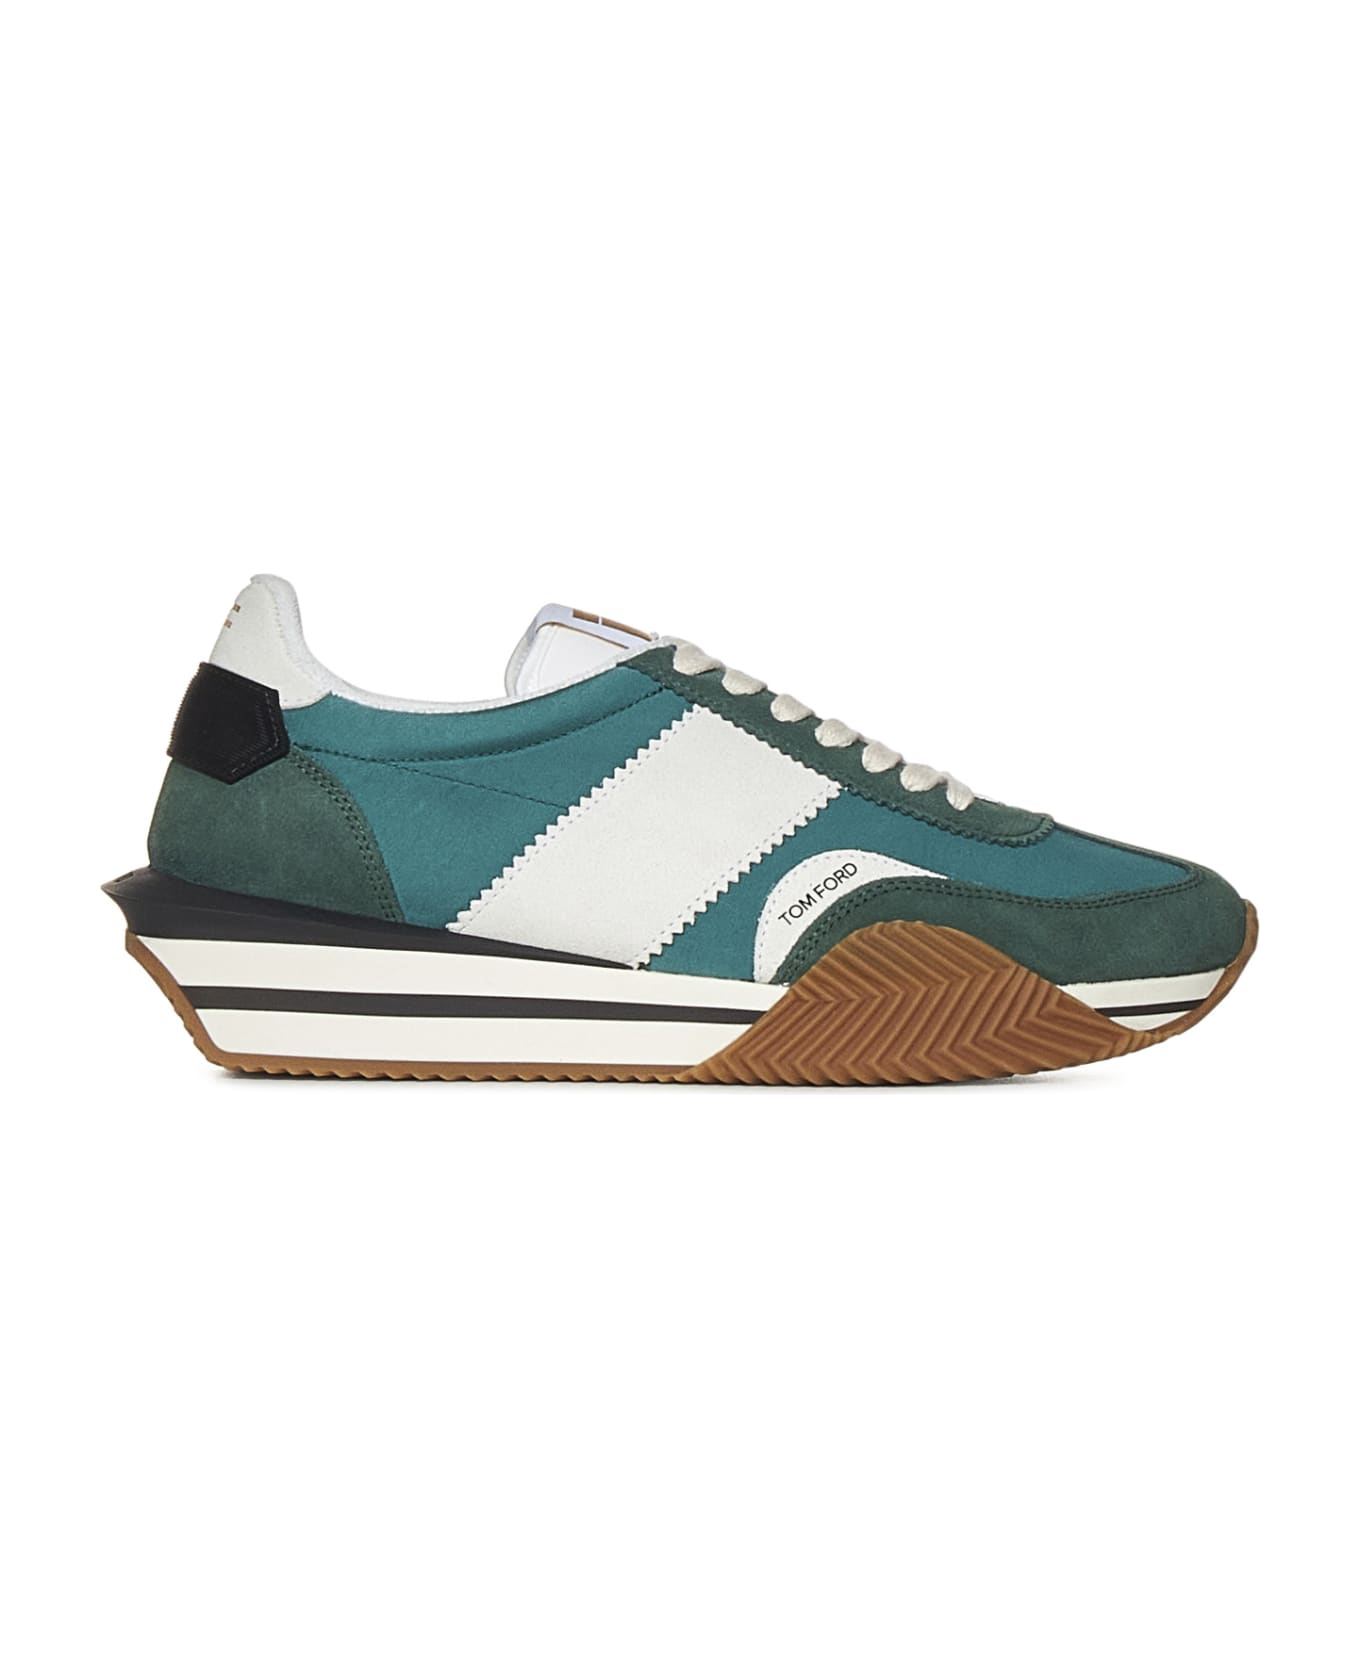 Tom Ford James Sneakers - Green/cream